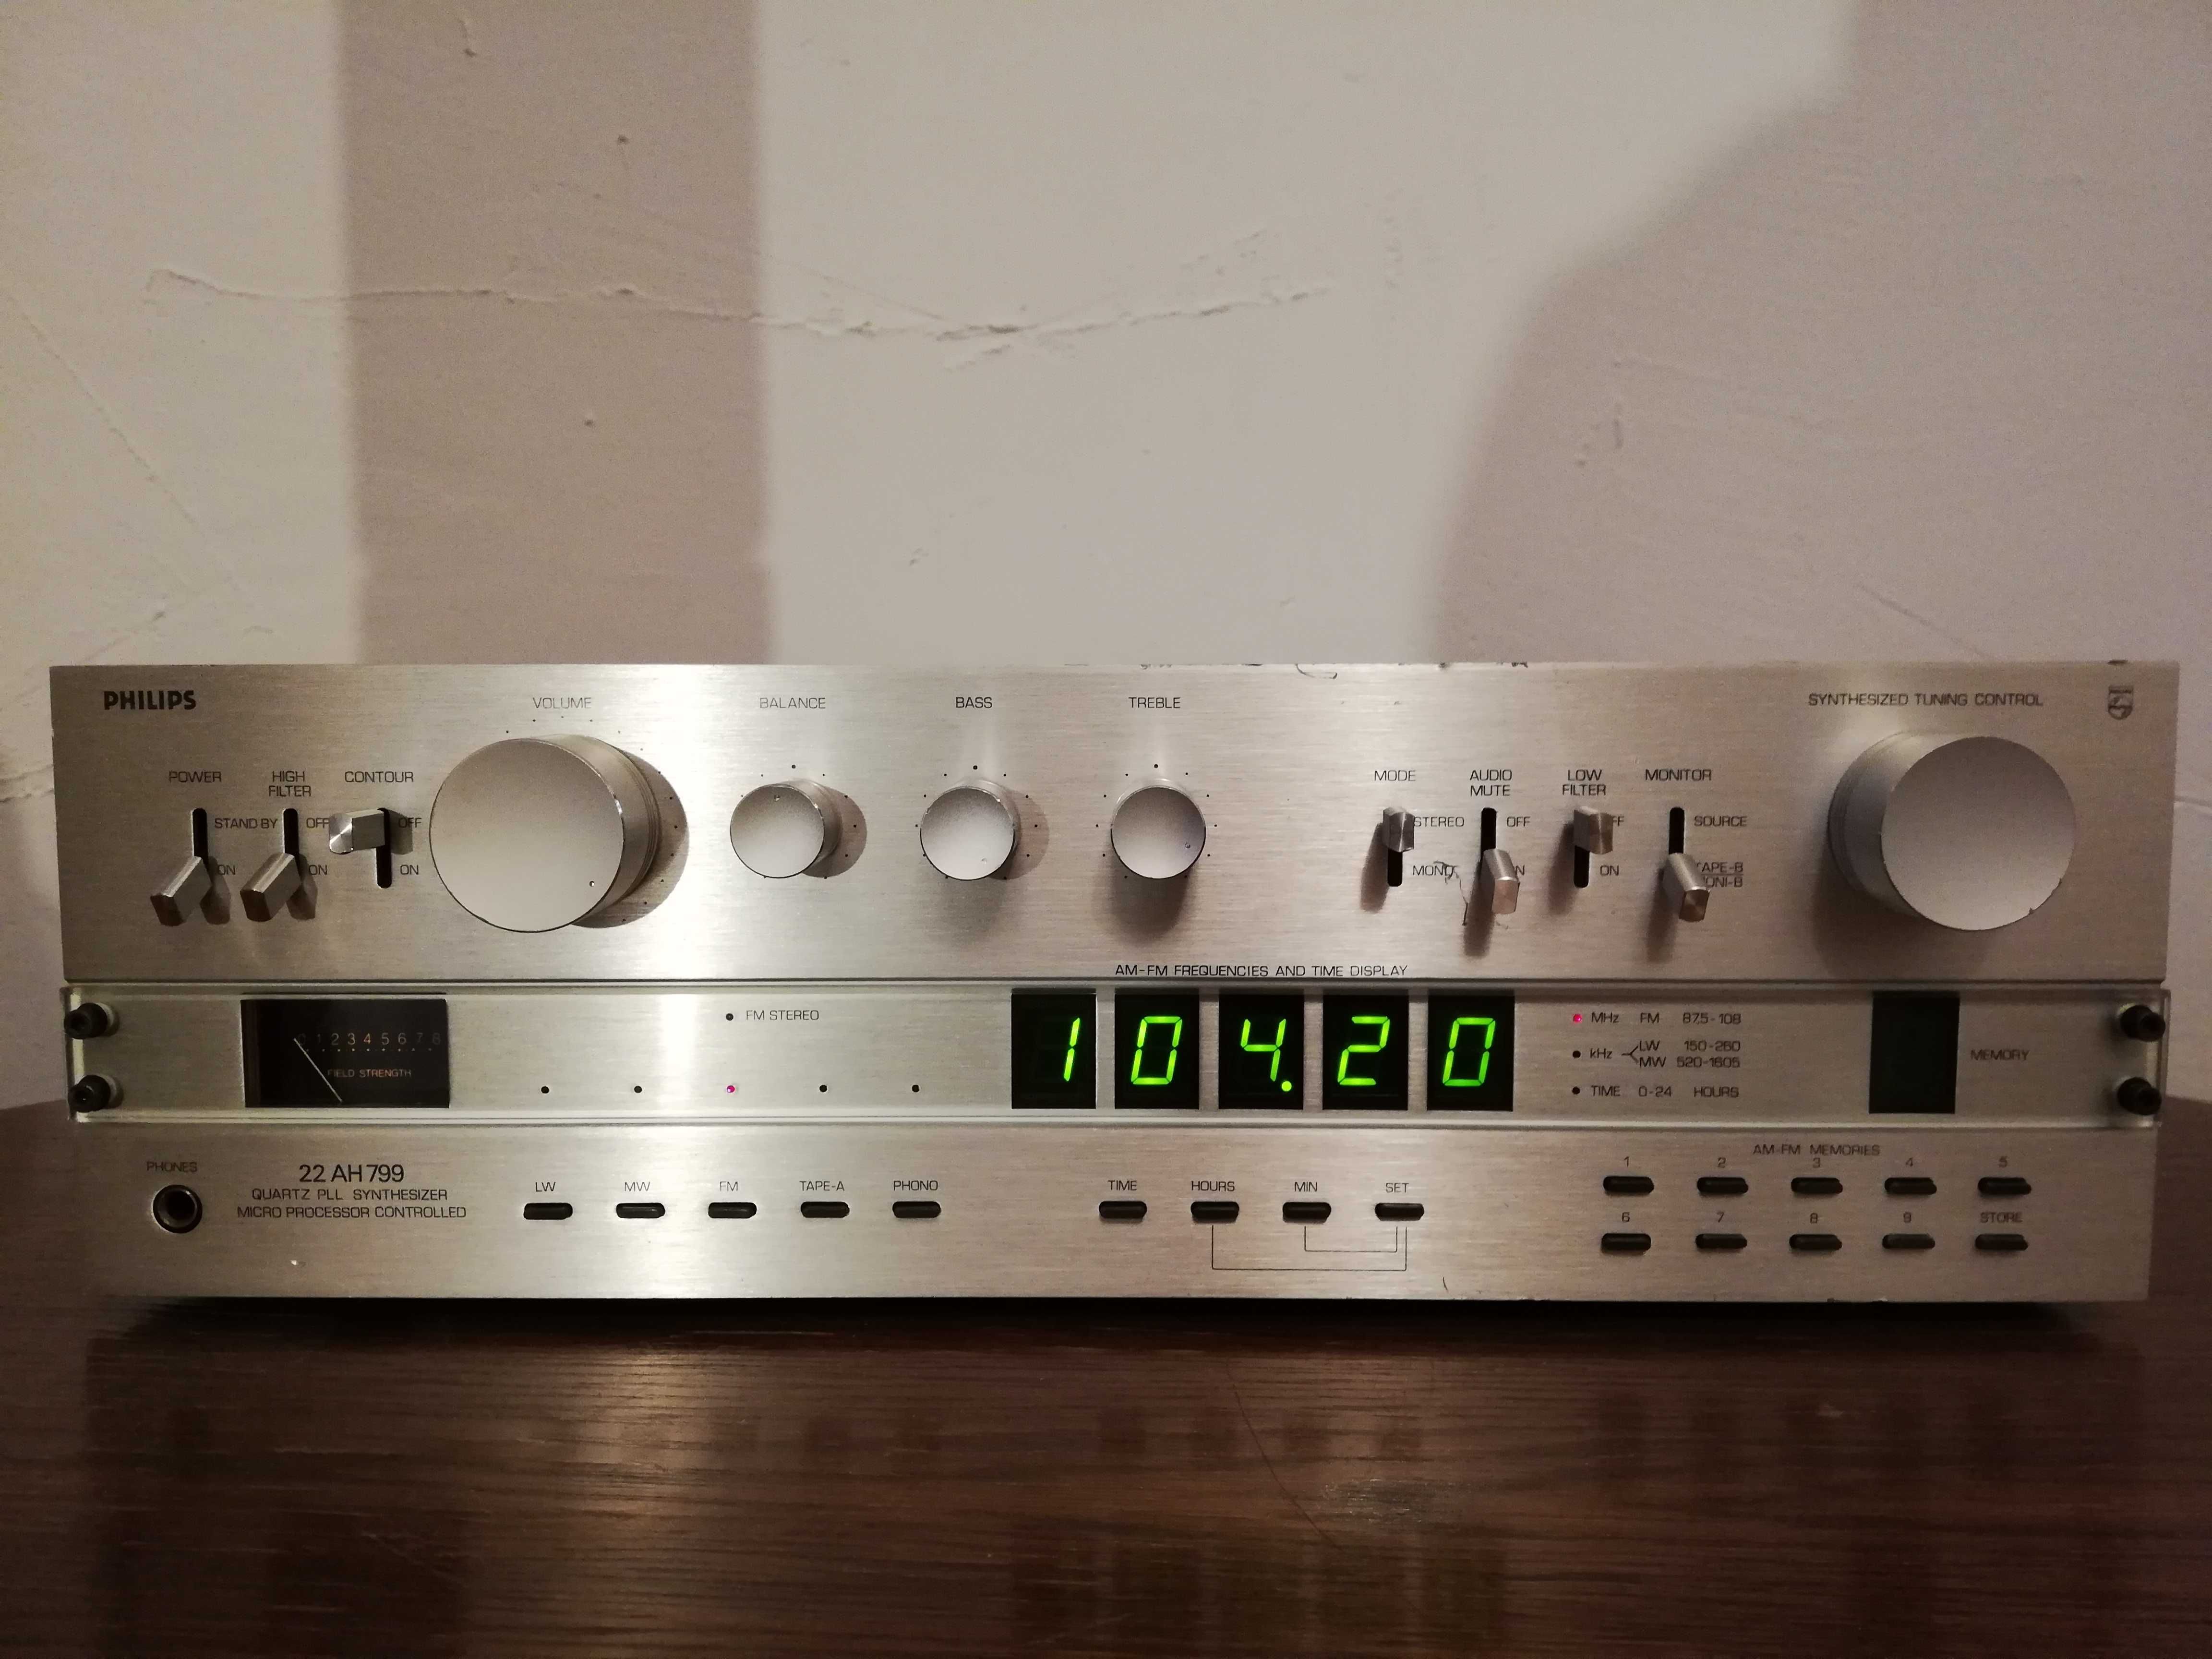 Amplificator/Tuner Stereo PHILIPS 22 AH 799 - made in Holland/Perfect